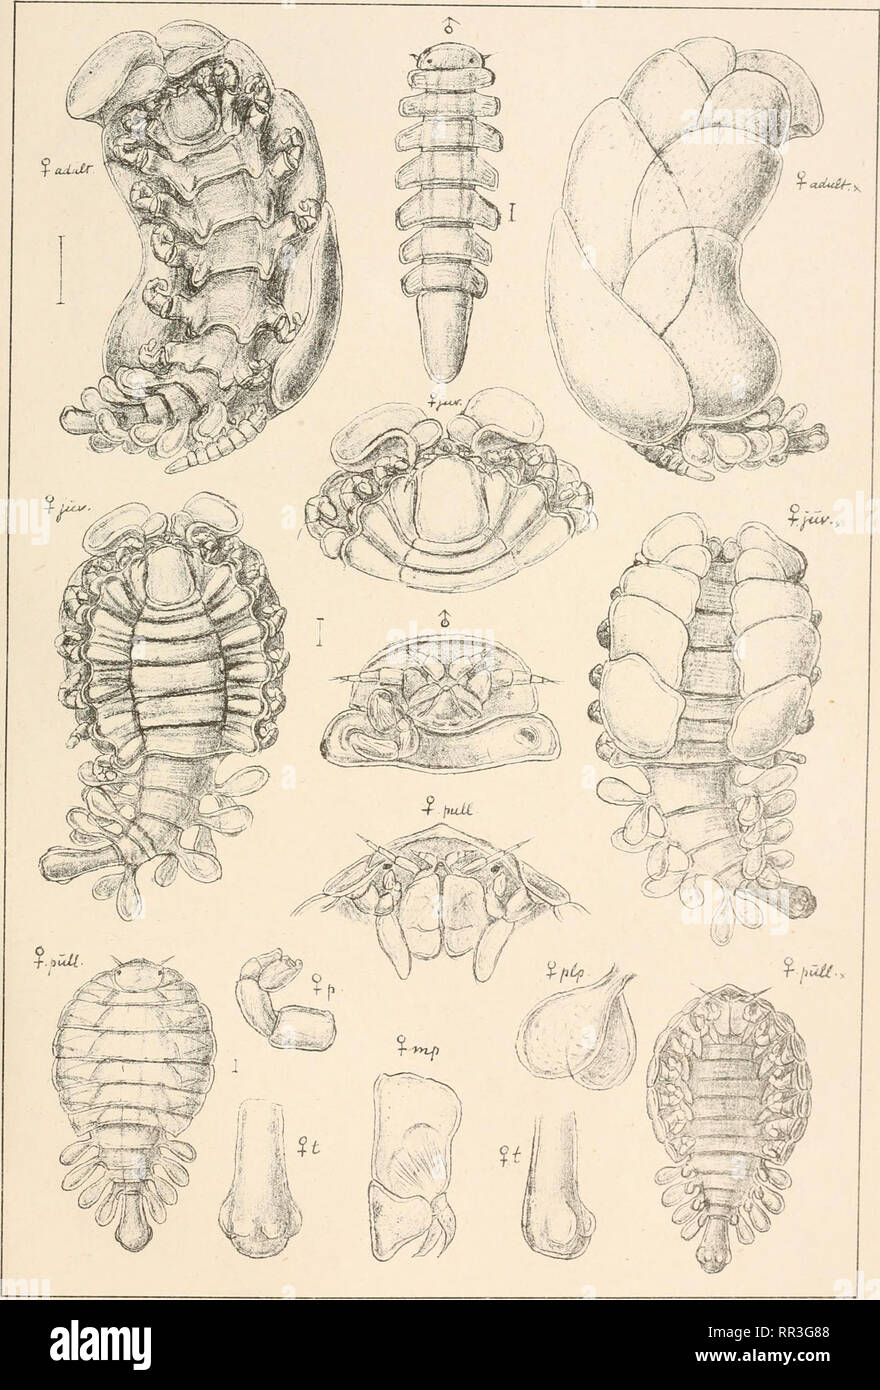 An account of the Crustacea of Norway, with short descriptions and figures  of all the species. Crustacea -- Norway. Bopyridae. I s op o da.. PI. 88.  G.0. S ars, autogr